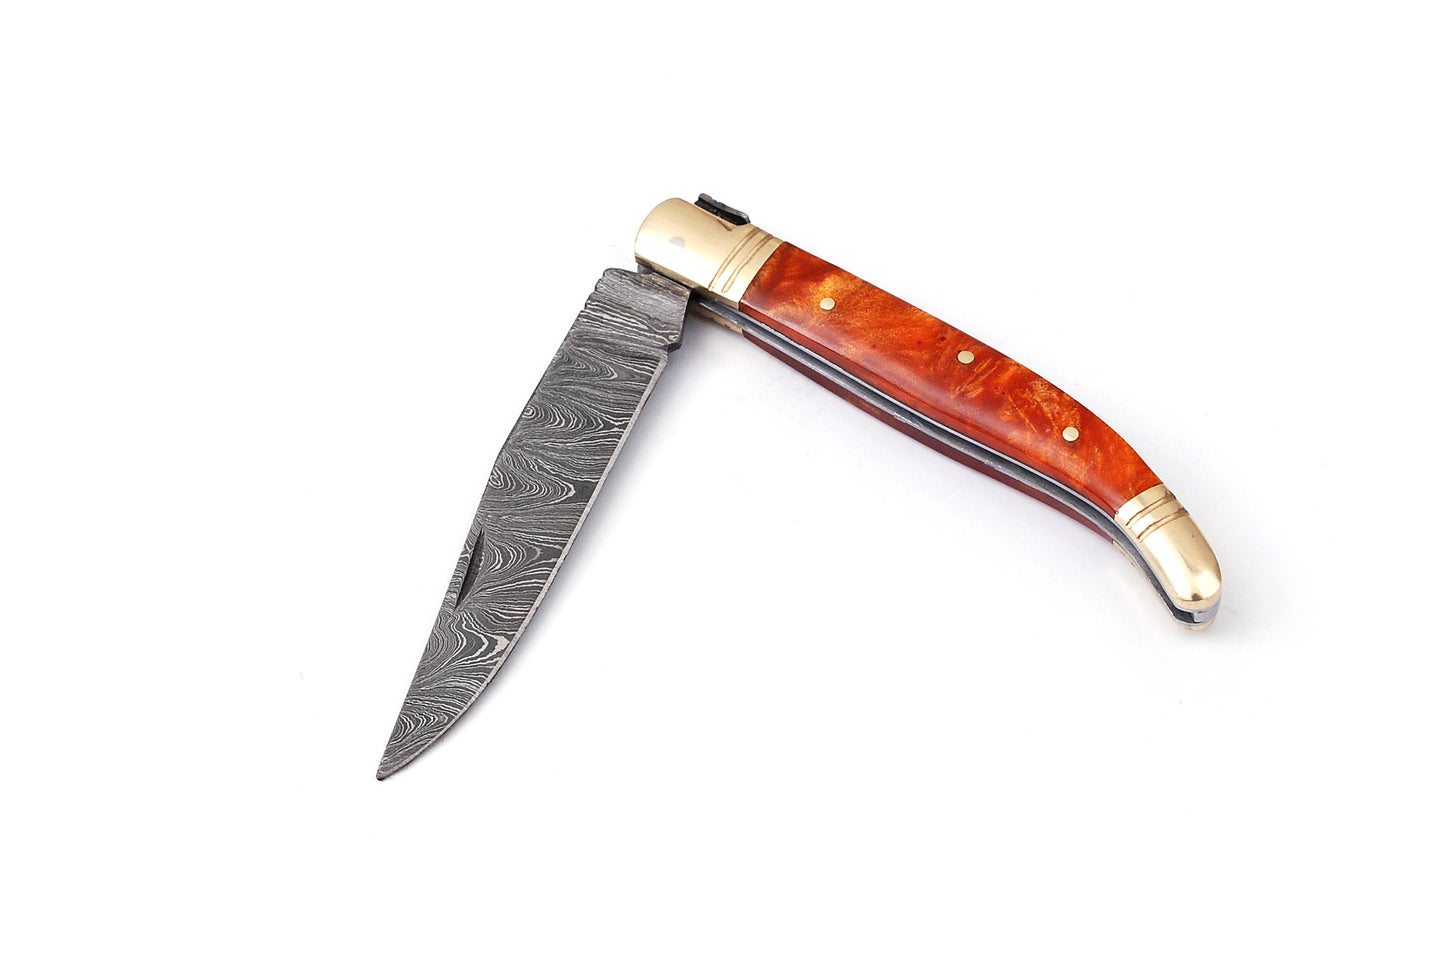 Laguiole Folding Damascus steel knife, 8.5" Long with 4" hand forged custom twist pattern Blade.Orange color unshrinkable Raisen scale with brass bolster, Cow hide leather sheath included